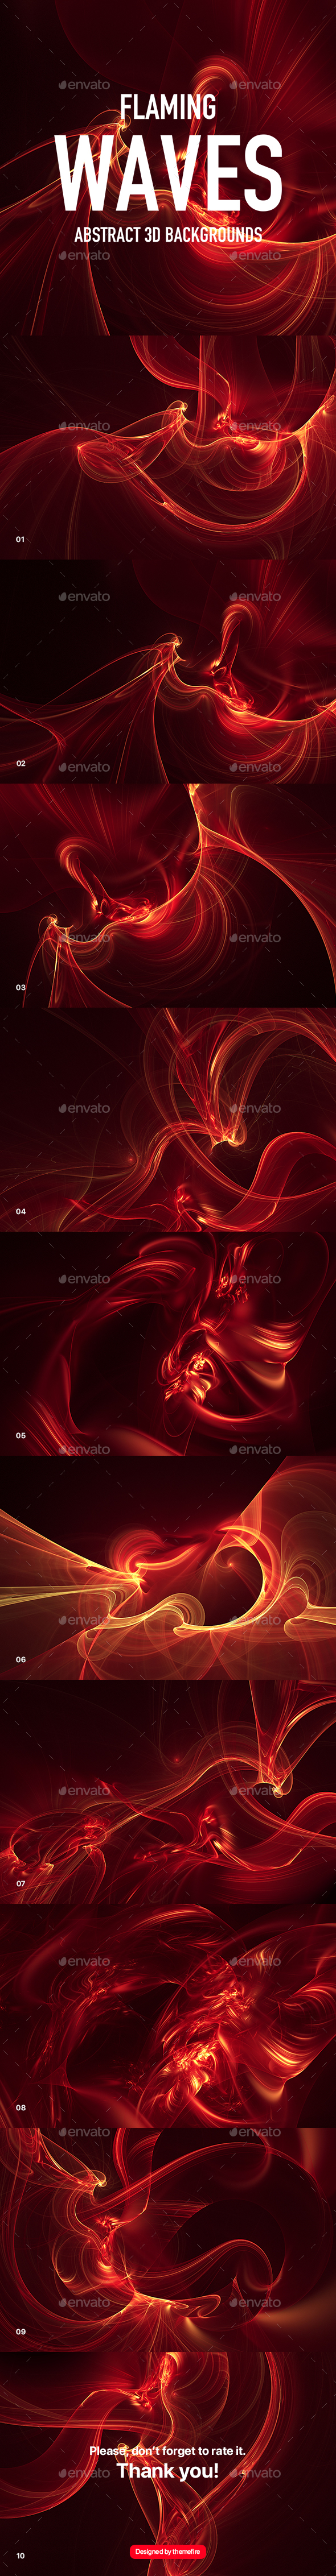 Flaming Waves Backgrounds